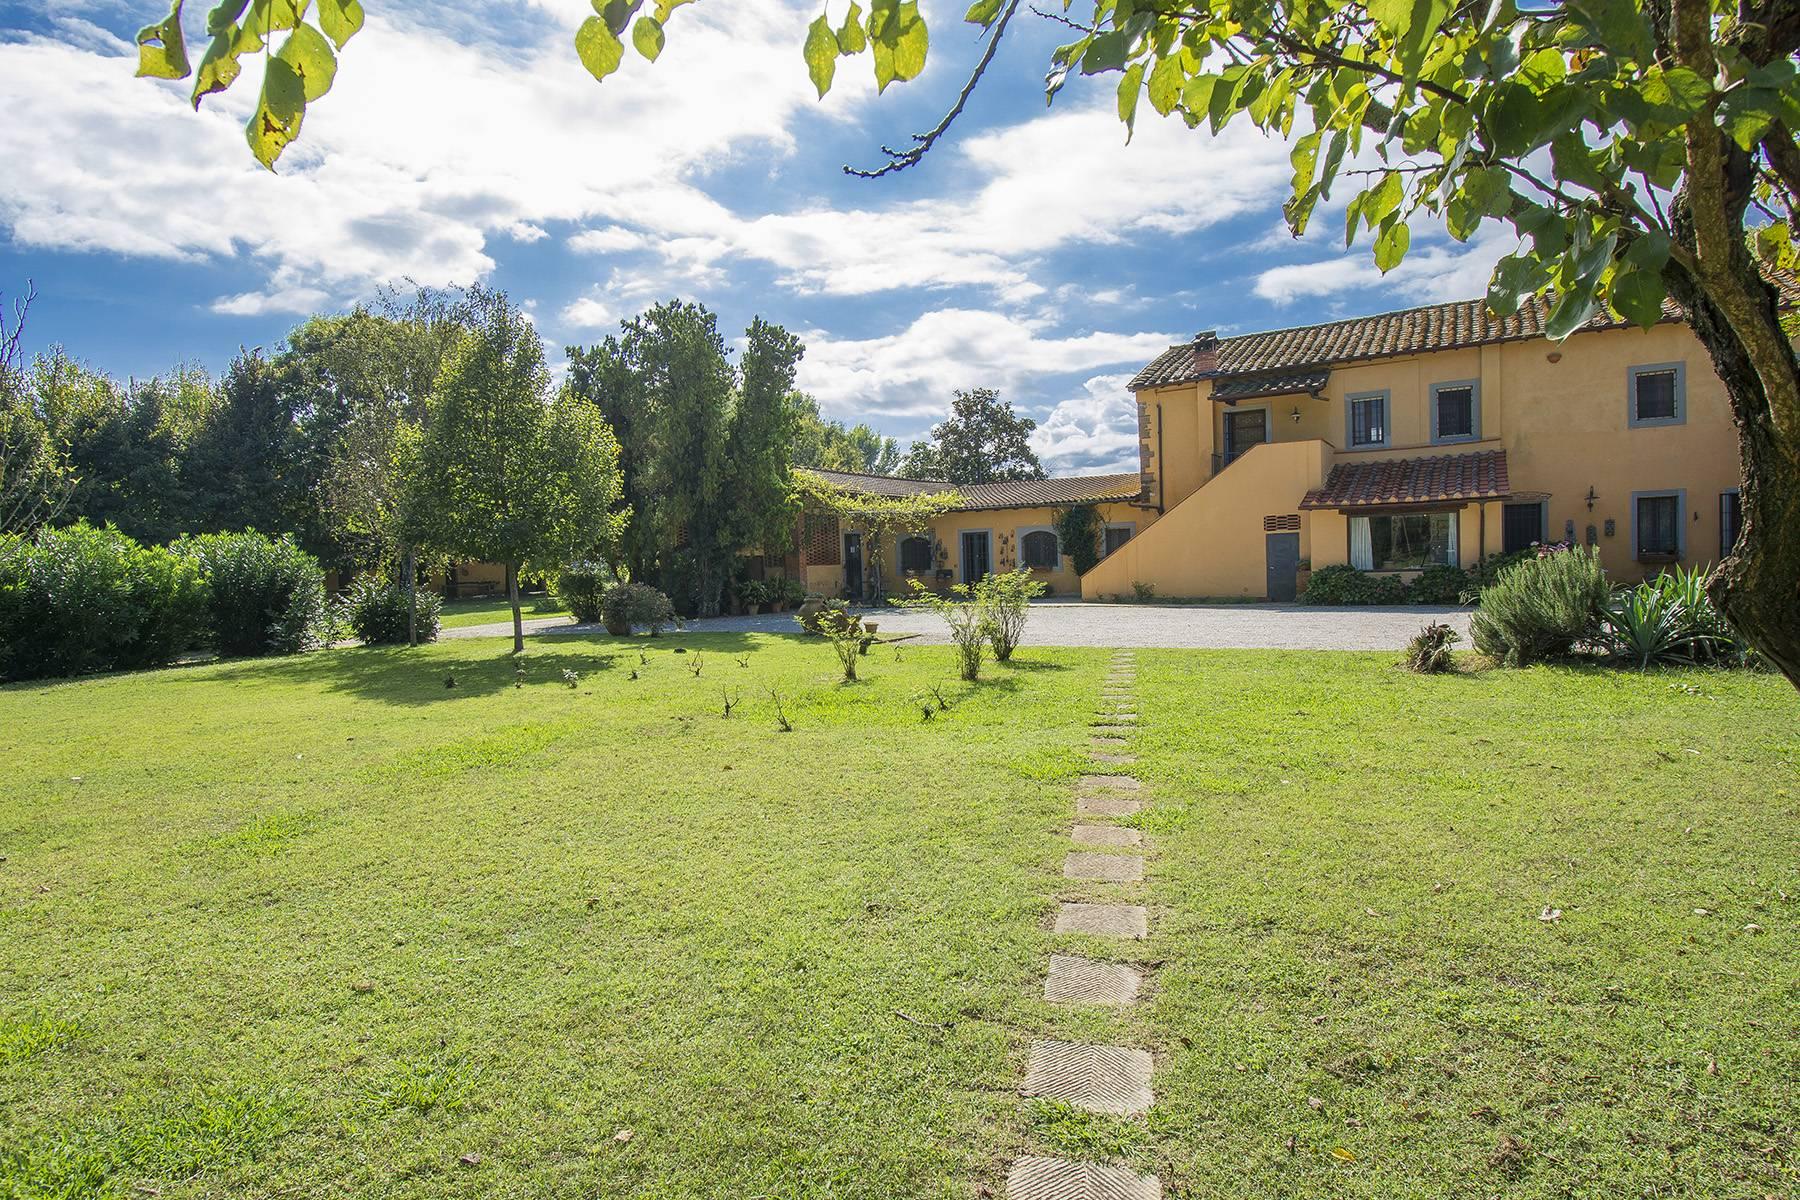 Equestrian farmhouse in the Tuscan countryside - 5